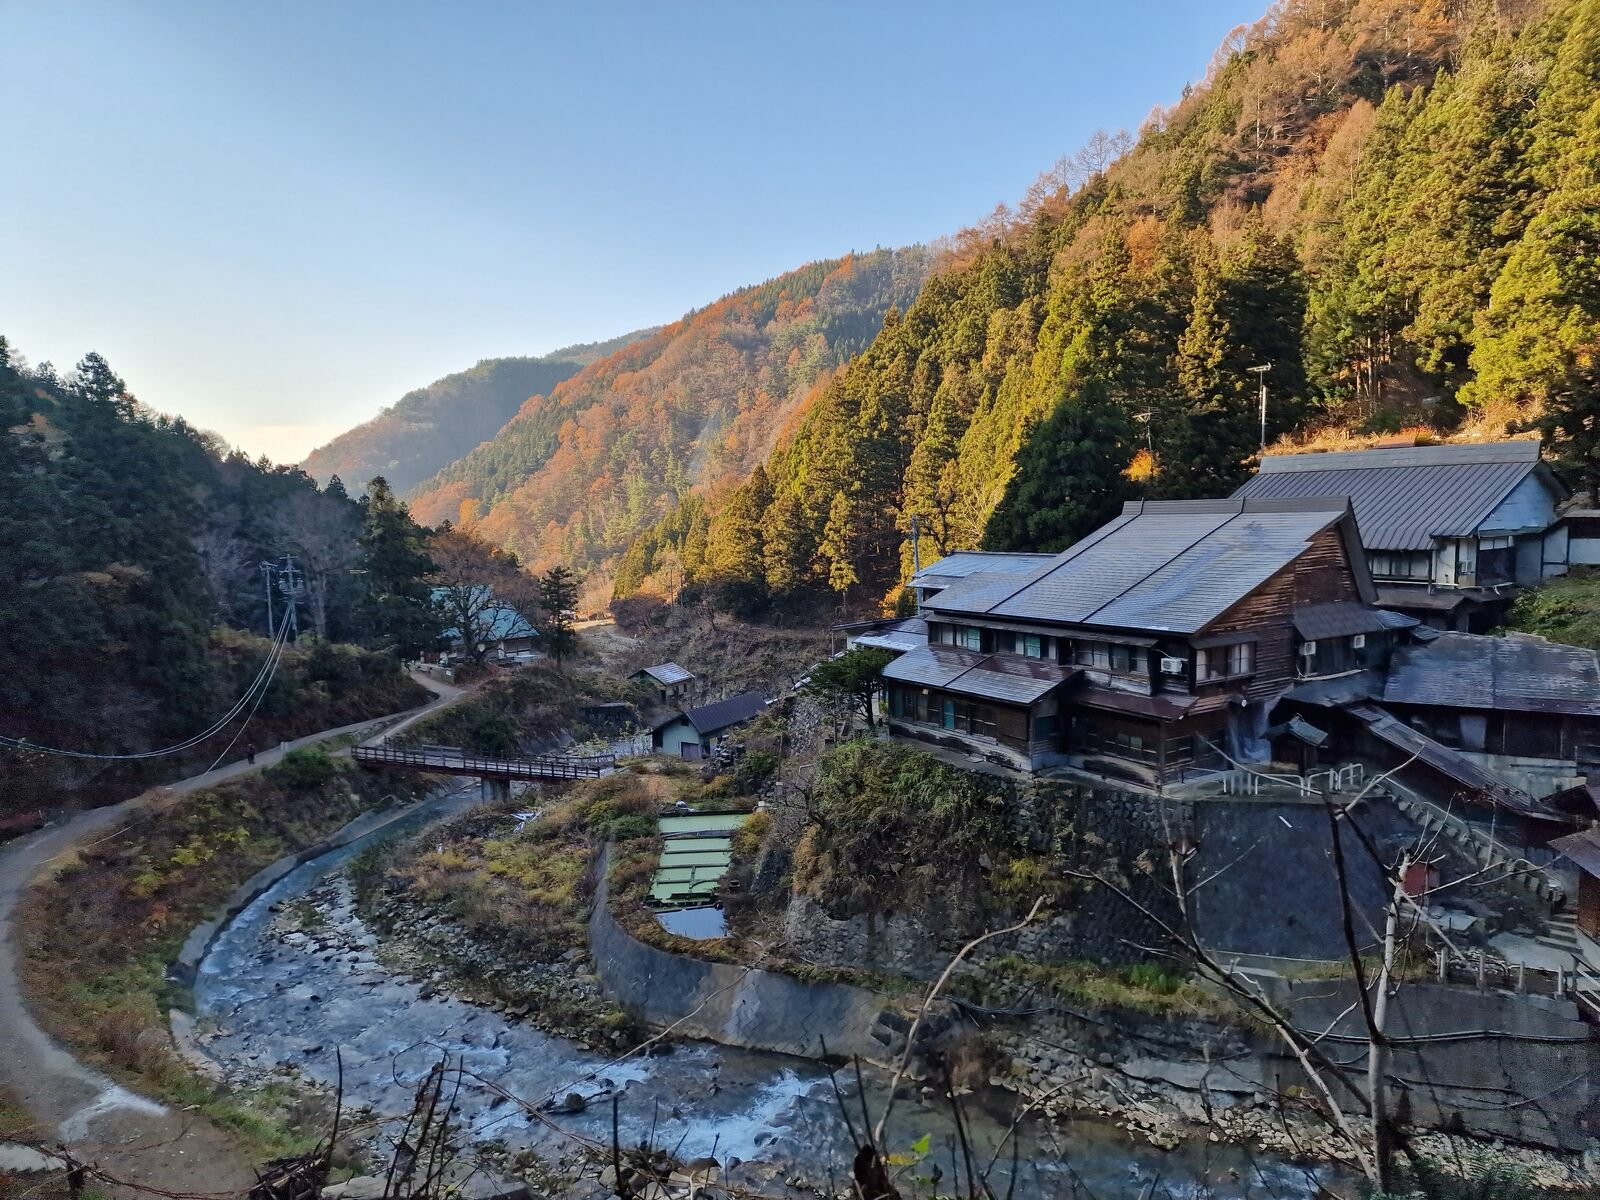 a river winding through a valley with a wooden guesthouse on the far bank